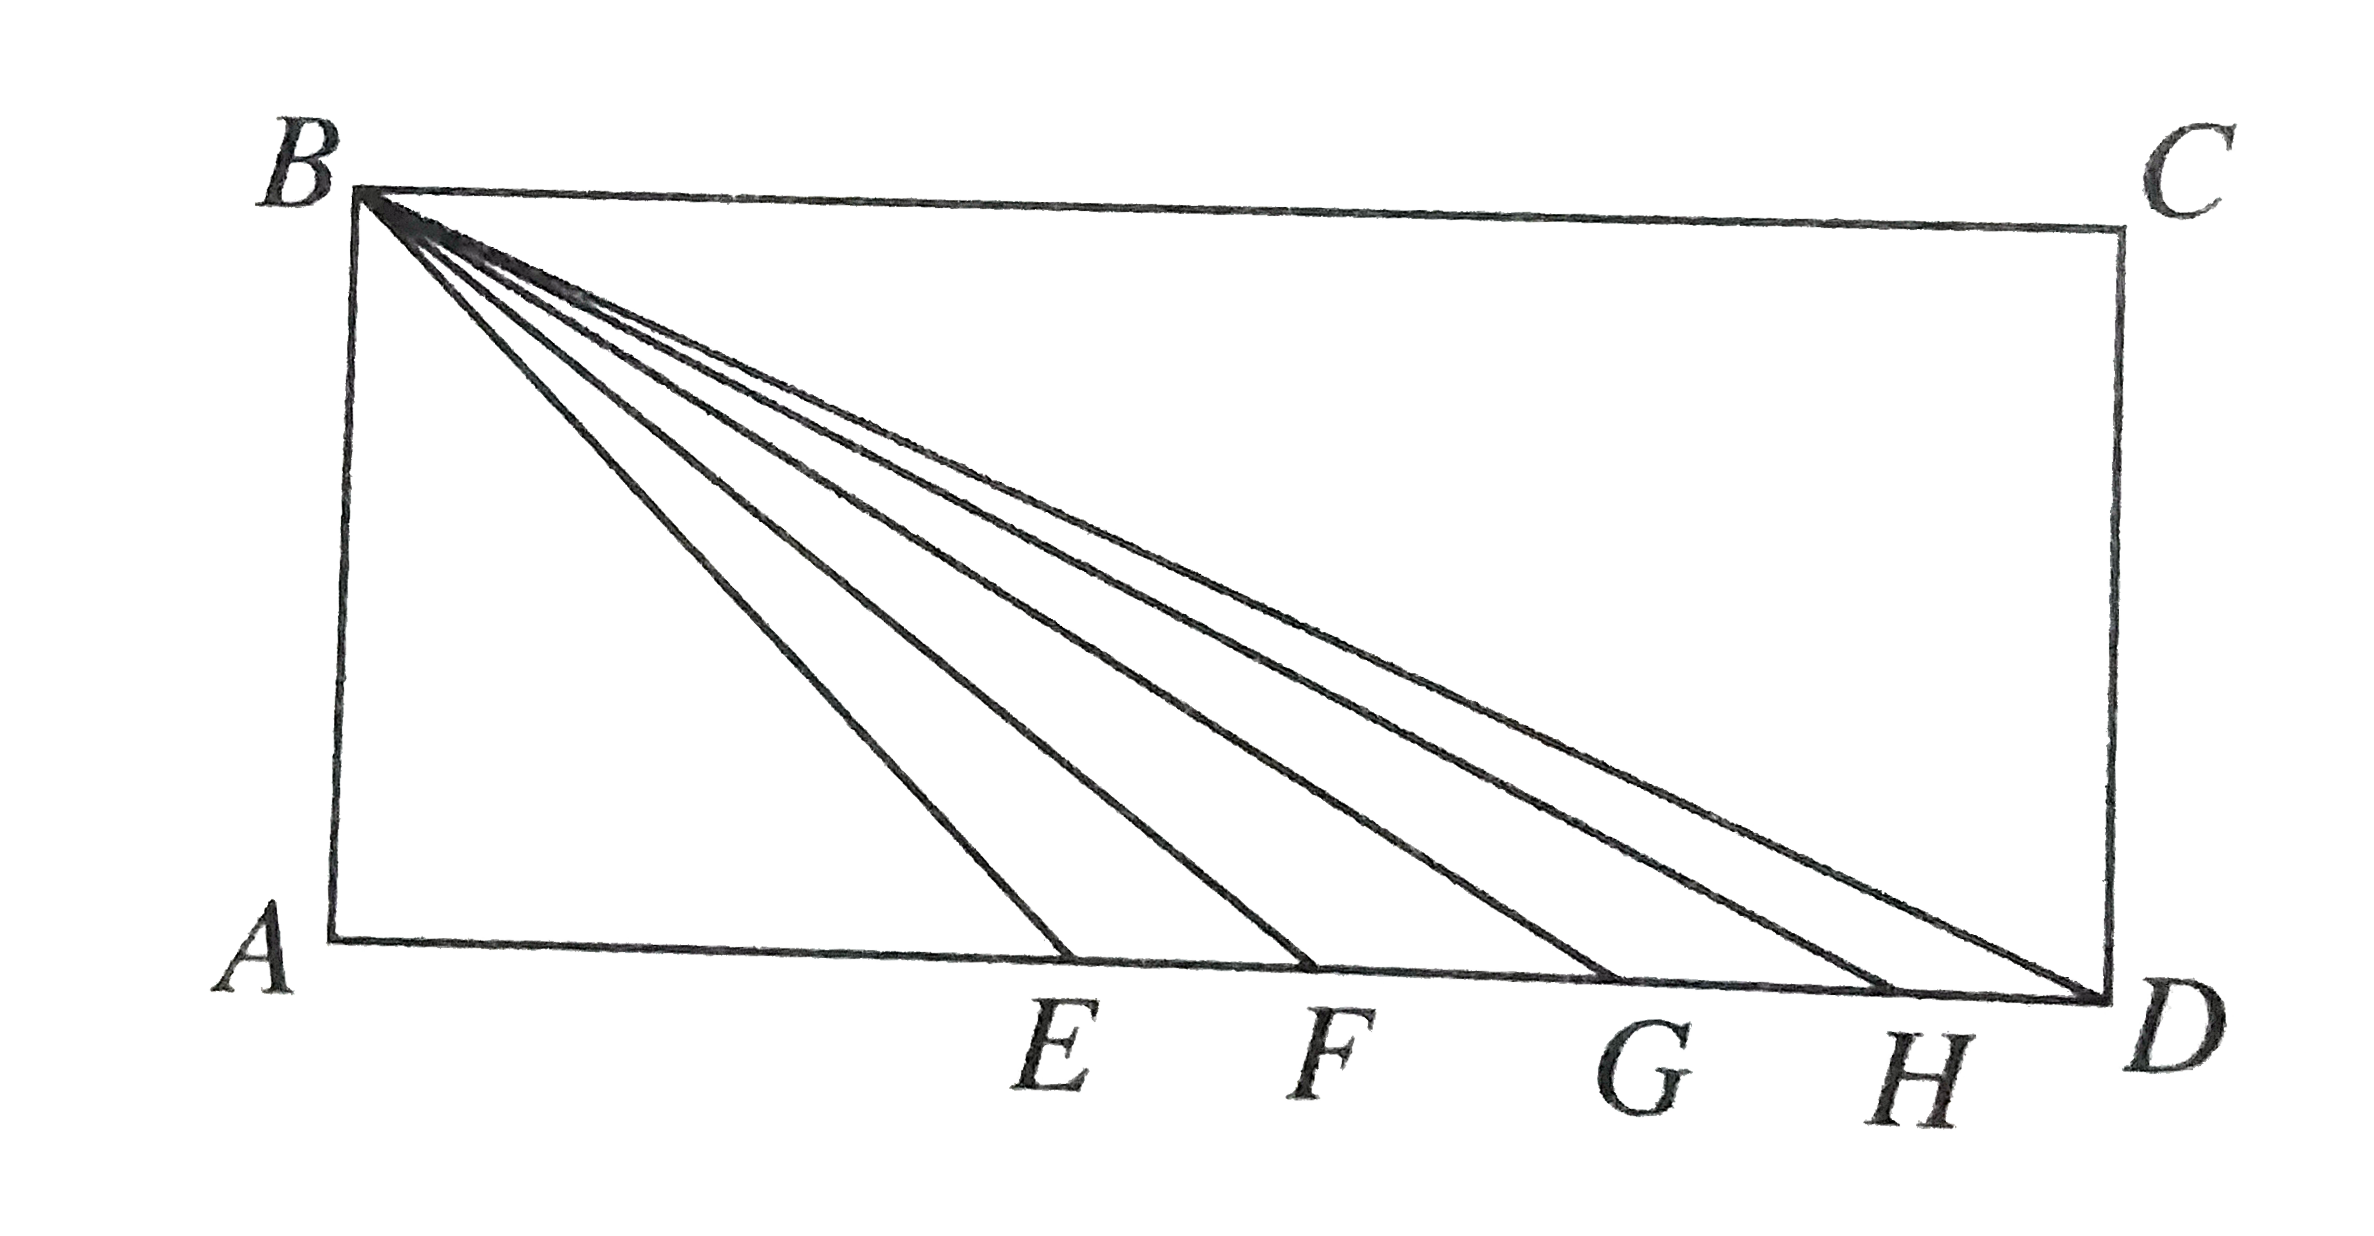 In the  figure  below  ,ABCD  is a  rectangle  , AB = AE , and E ,  F,G, and H  lie  on AD .  OF the  angles  BEA  ,  angle  BFA  , angle  BGA, angle  BHA , and  angle BDA   , which  one has  the greatest tangent ?